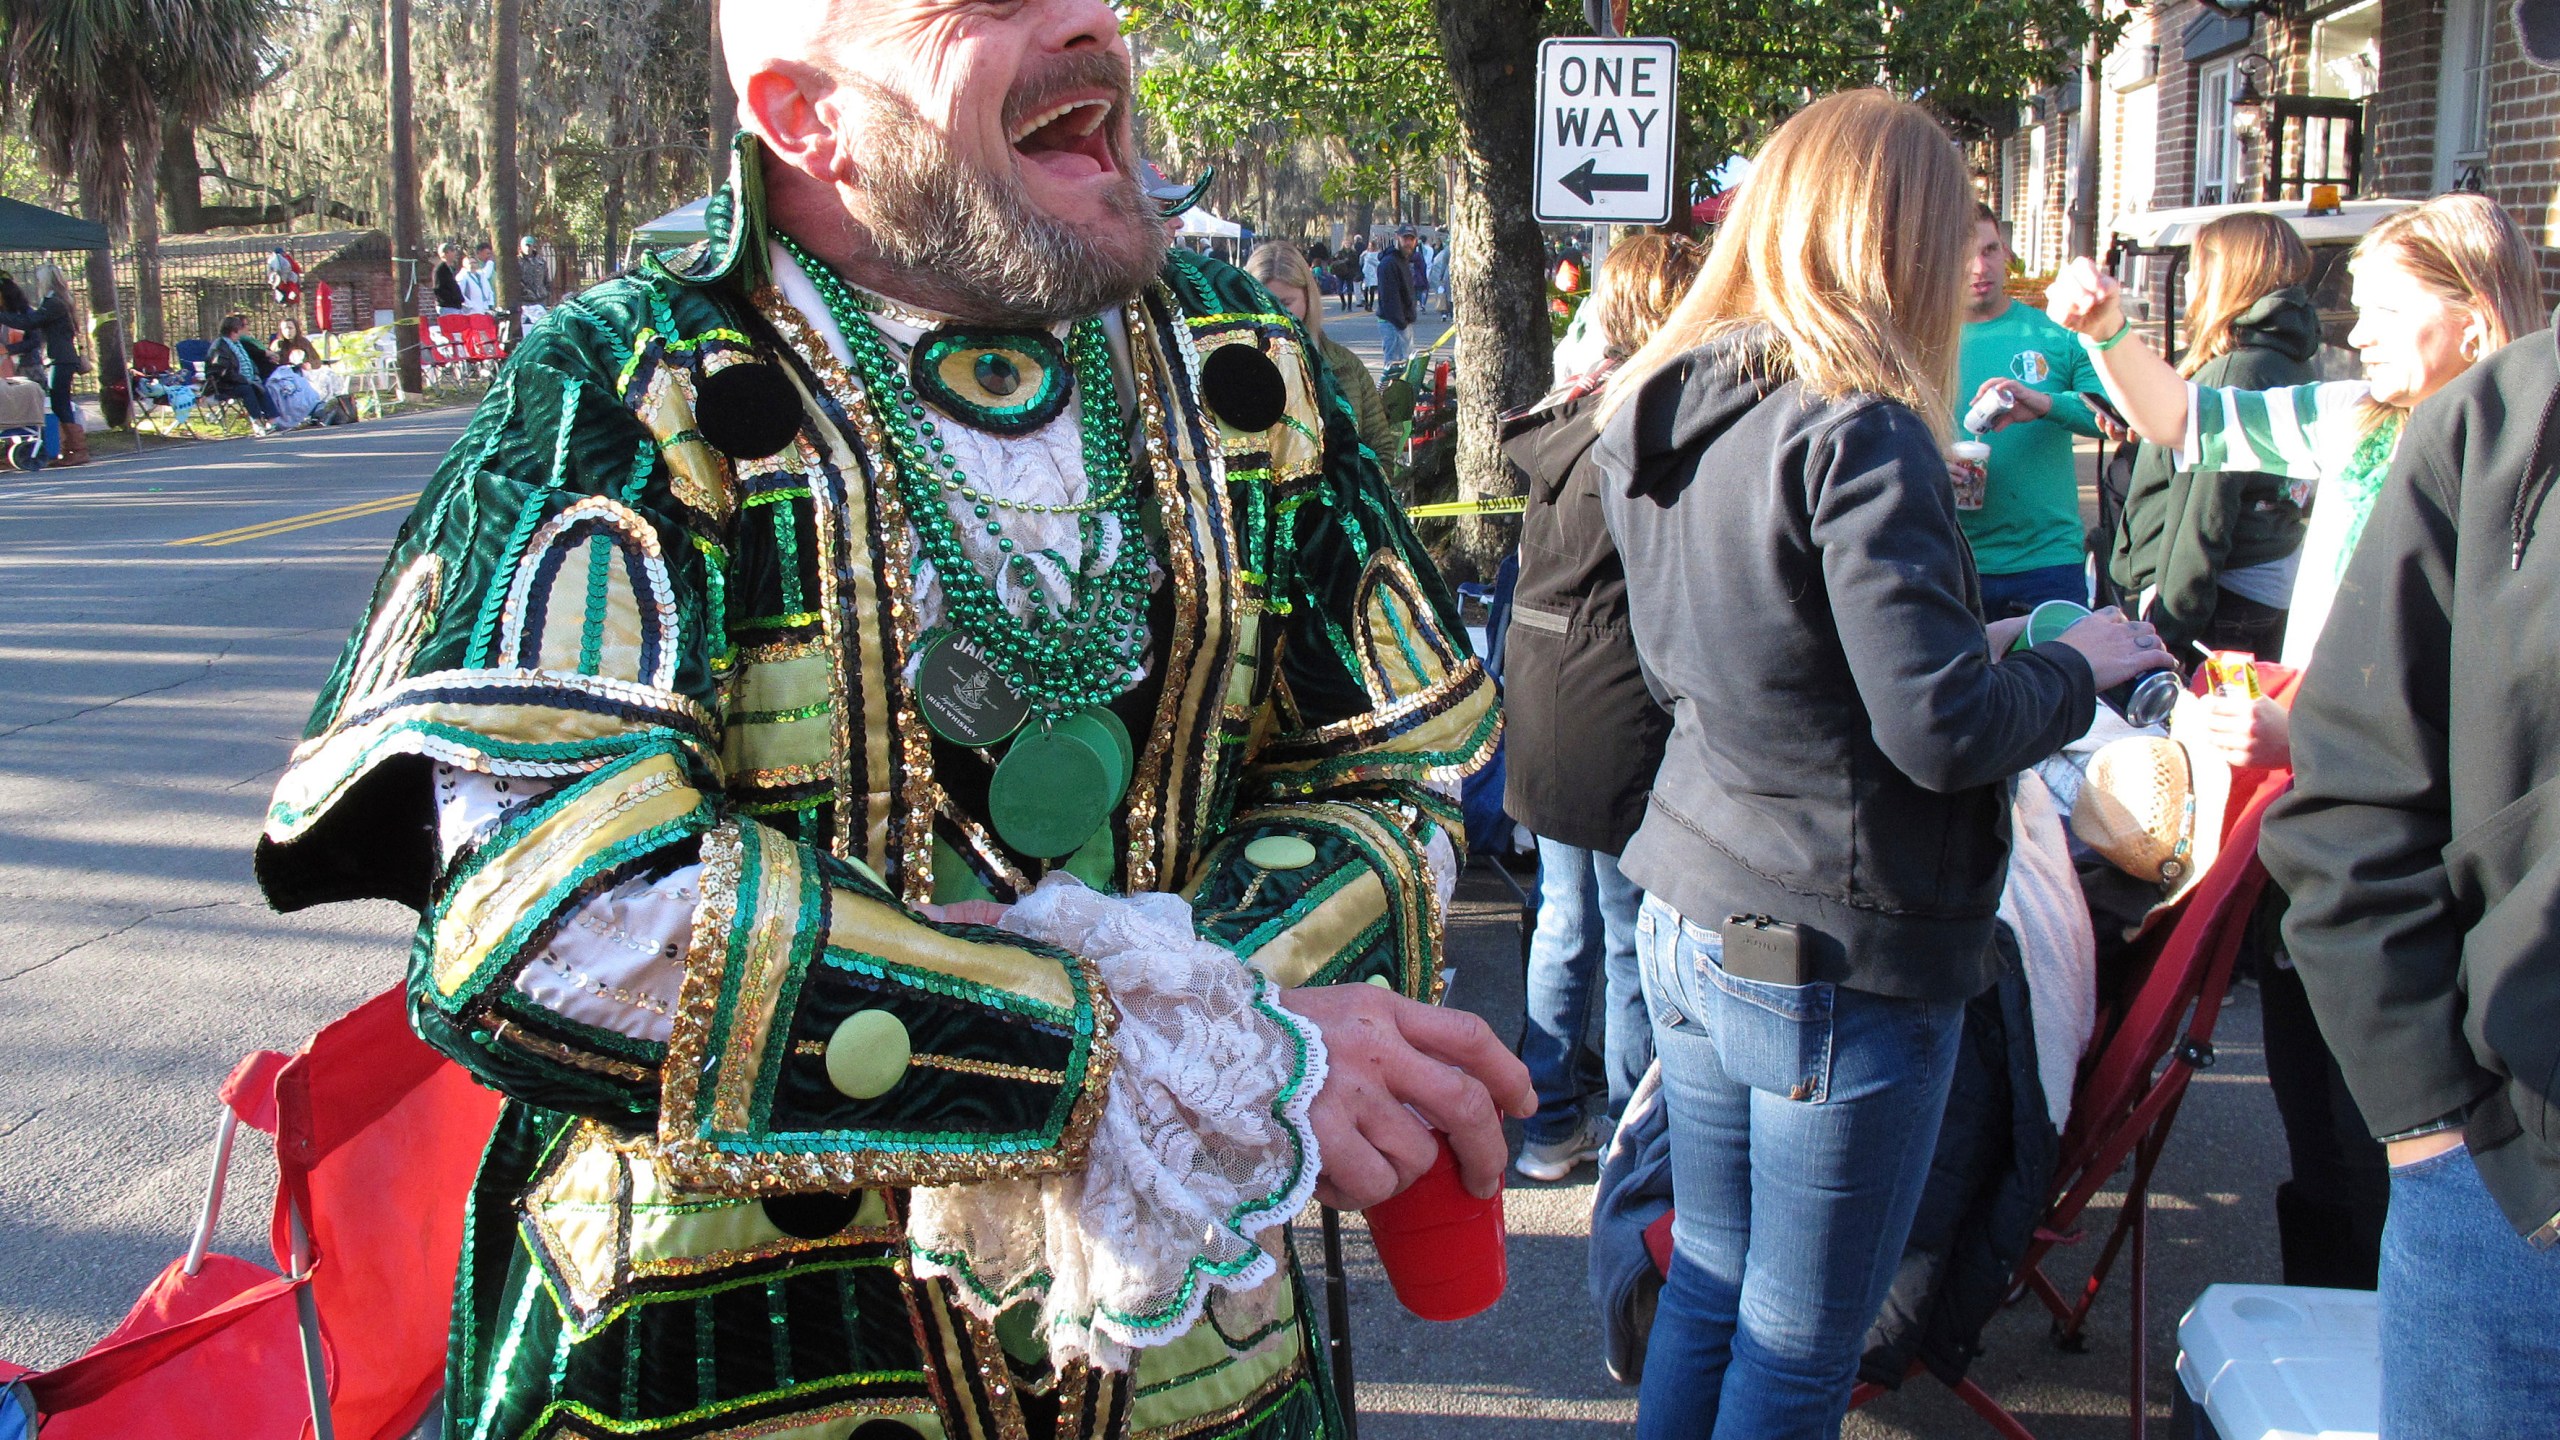 FILE - Brian Welzenbach laughs with friends, March 17, 2017, while celebrating St. Patrick's Day in Savannah, Ga. Savannah, Georgia's oldest city, is planning a supersized celebration as it marks the 200th anniversary of its beloved St. Patrick's Day parade. City Manager Jay Melder says he's expecting historic crowds for the Irish-themed parade Saturday, March 16, 2024. (AP Photo/Russ Bynum, file)